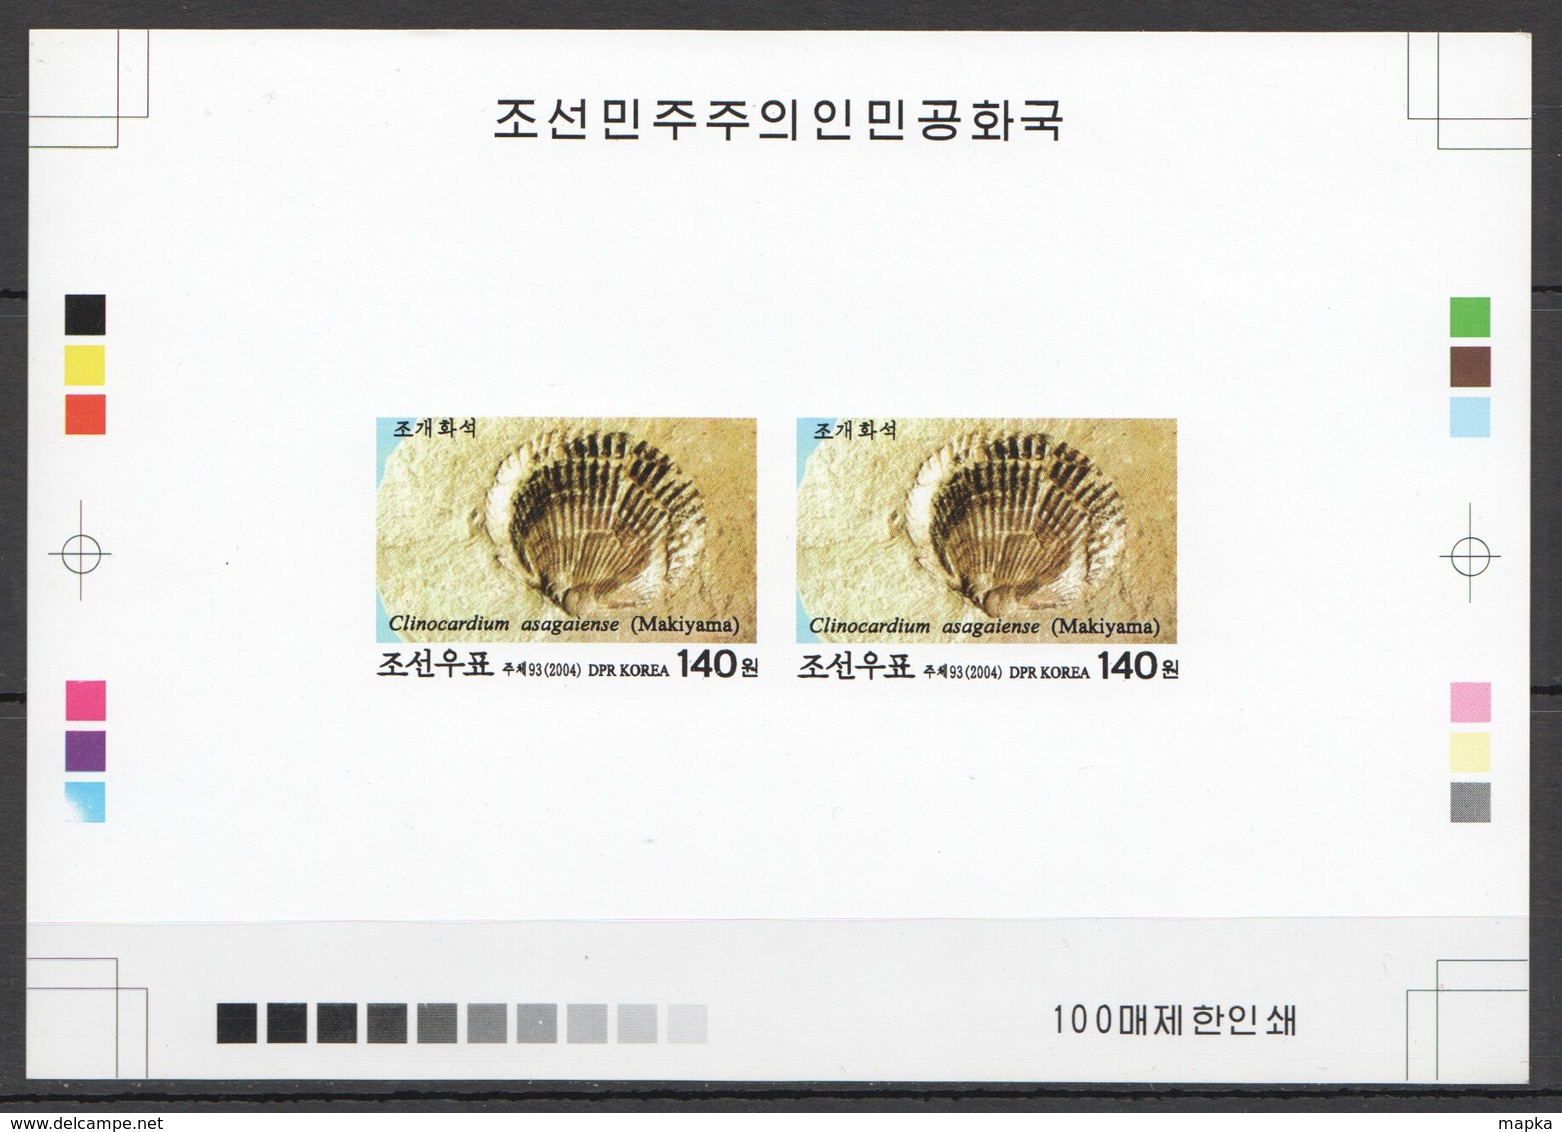 BB246 IMPERFORATE 2004 KOREA FOSSILS MAKIYAMA !!! 100 ONLY PROOF PAIR OF 2 MNH - Fossils